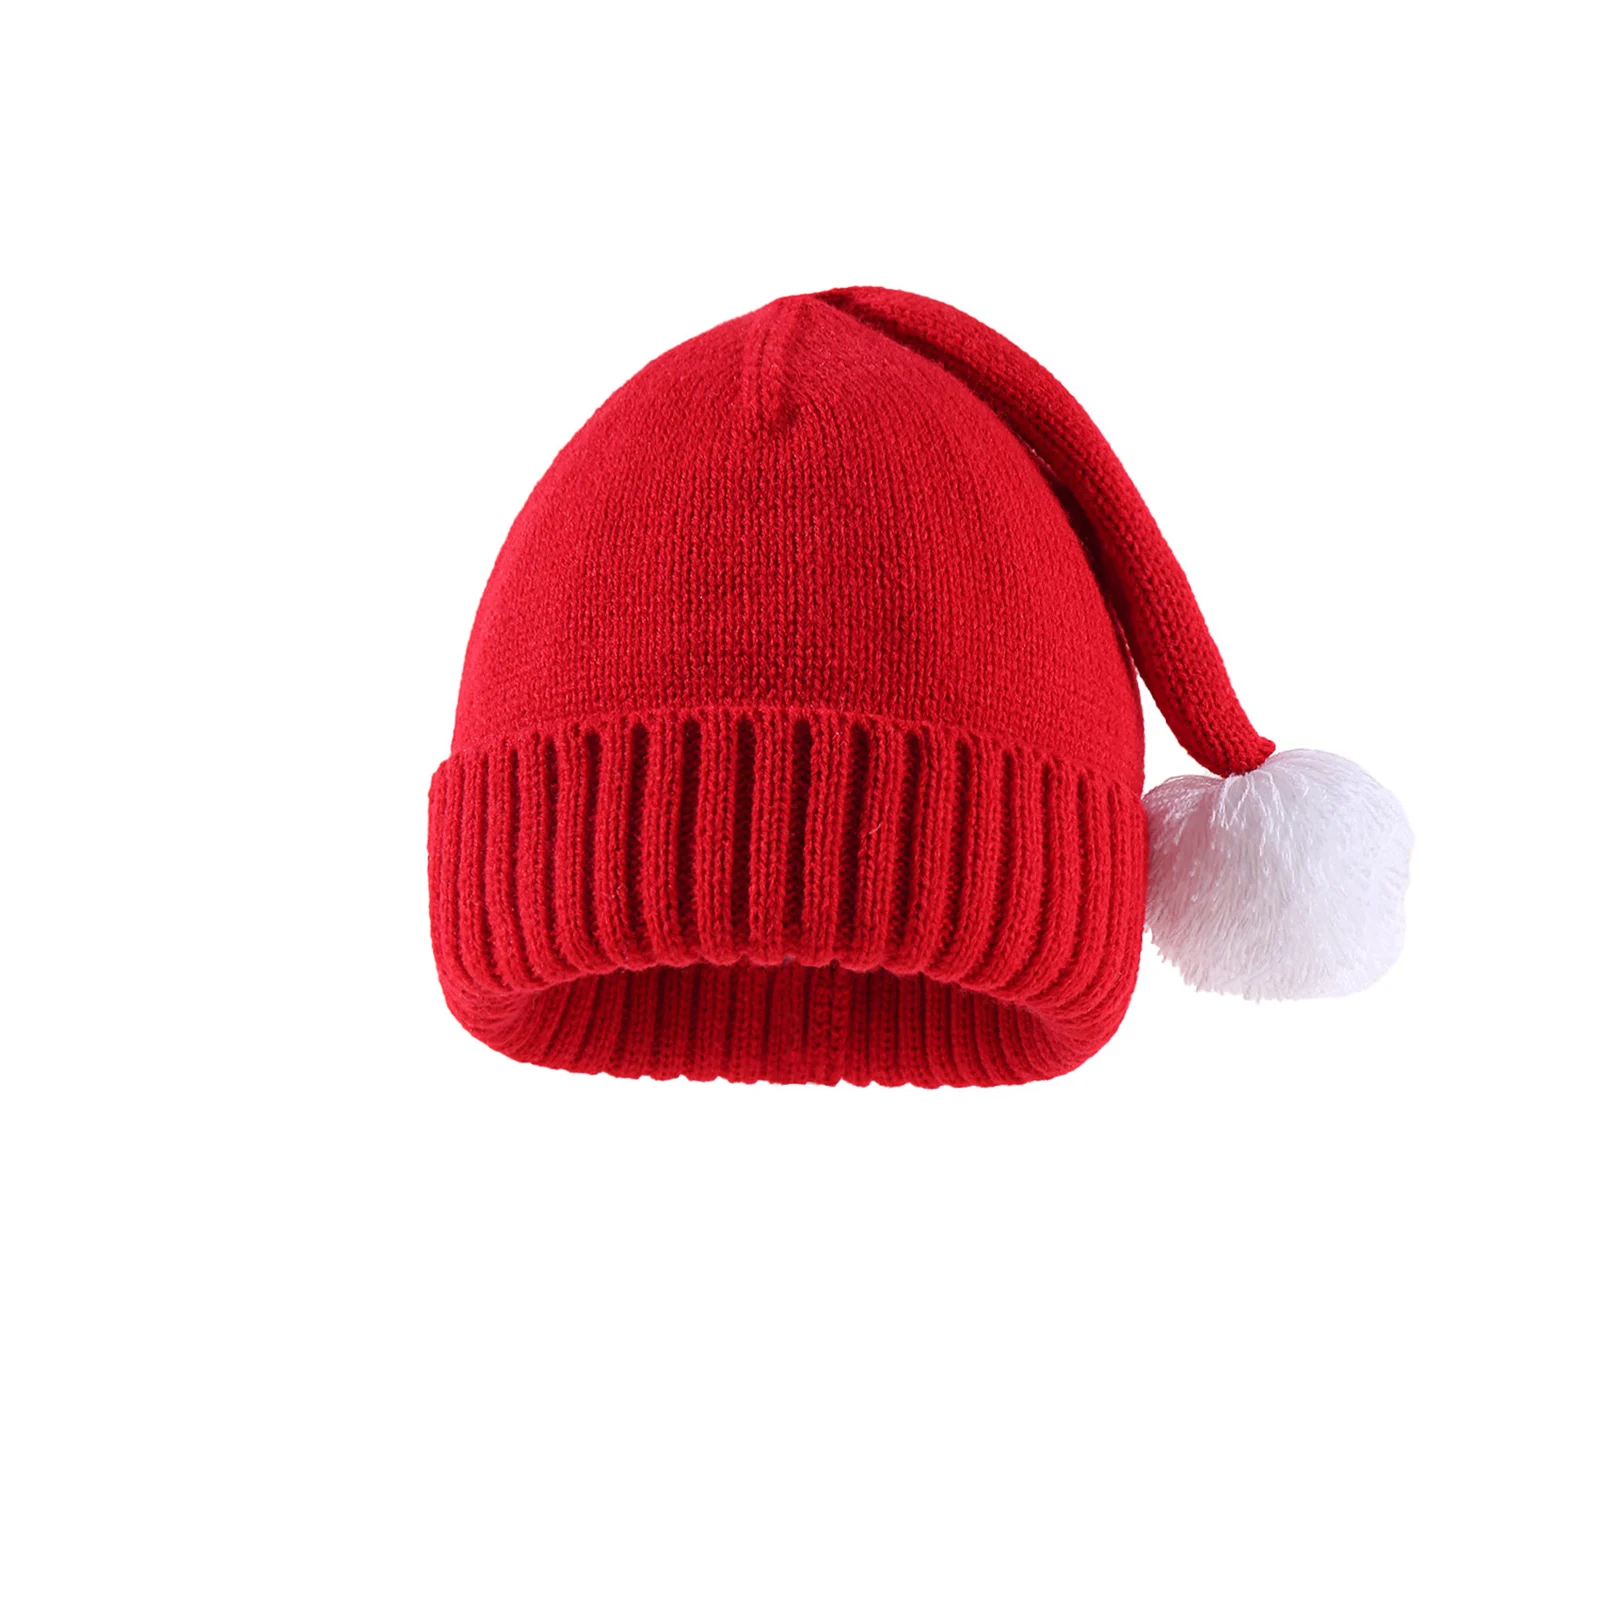 BeQeuewll Family Matching Santa Hats Knitted Christmas Beanie Soft Warm Winter Caps for Adult Kids Streetwear Clothing Accessory